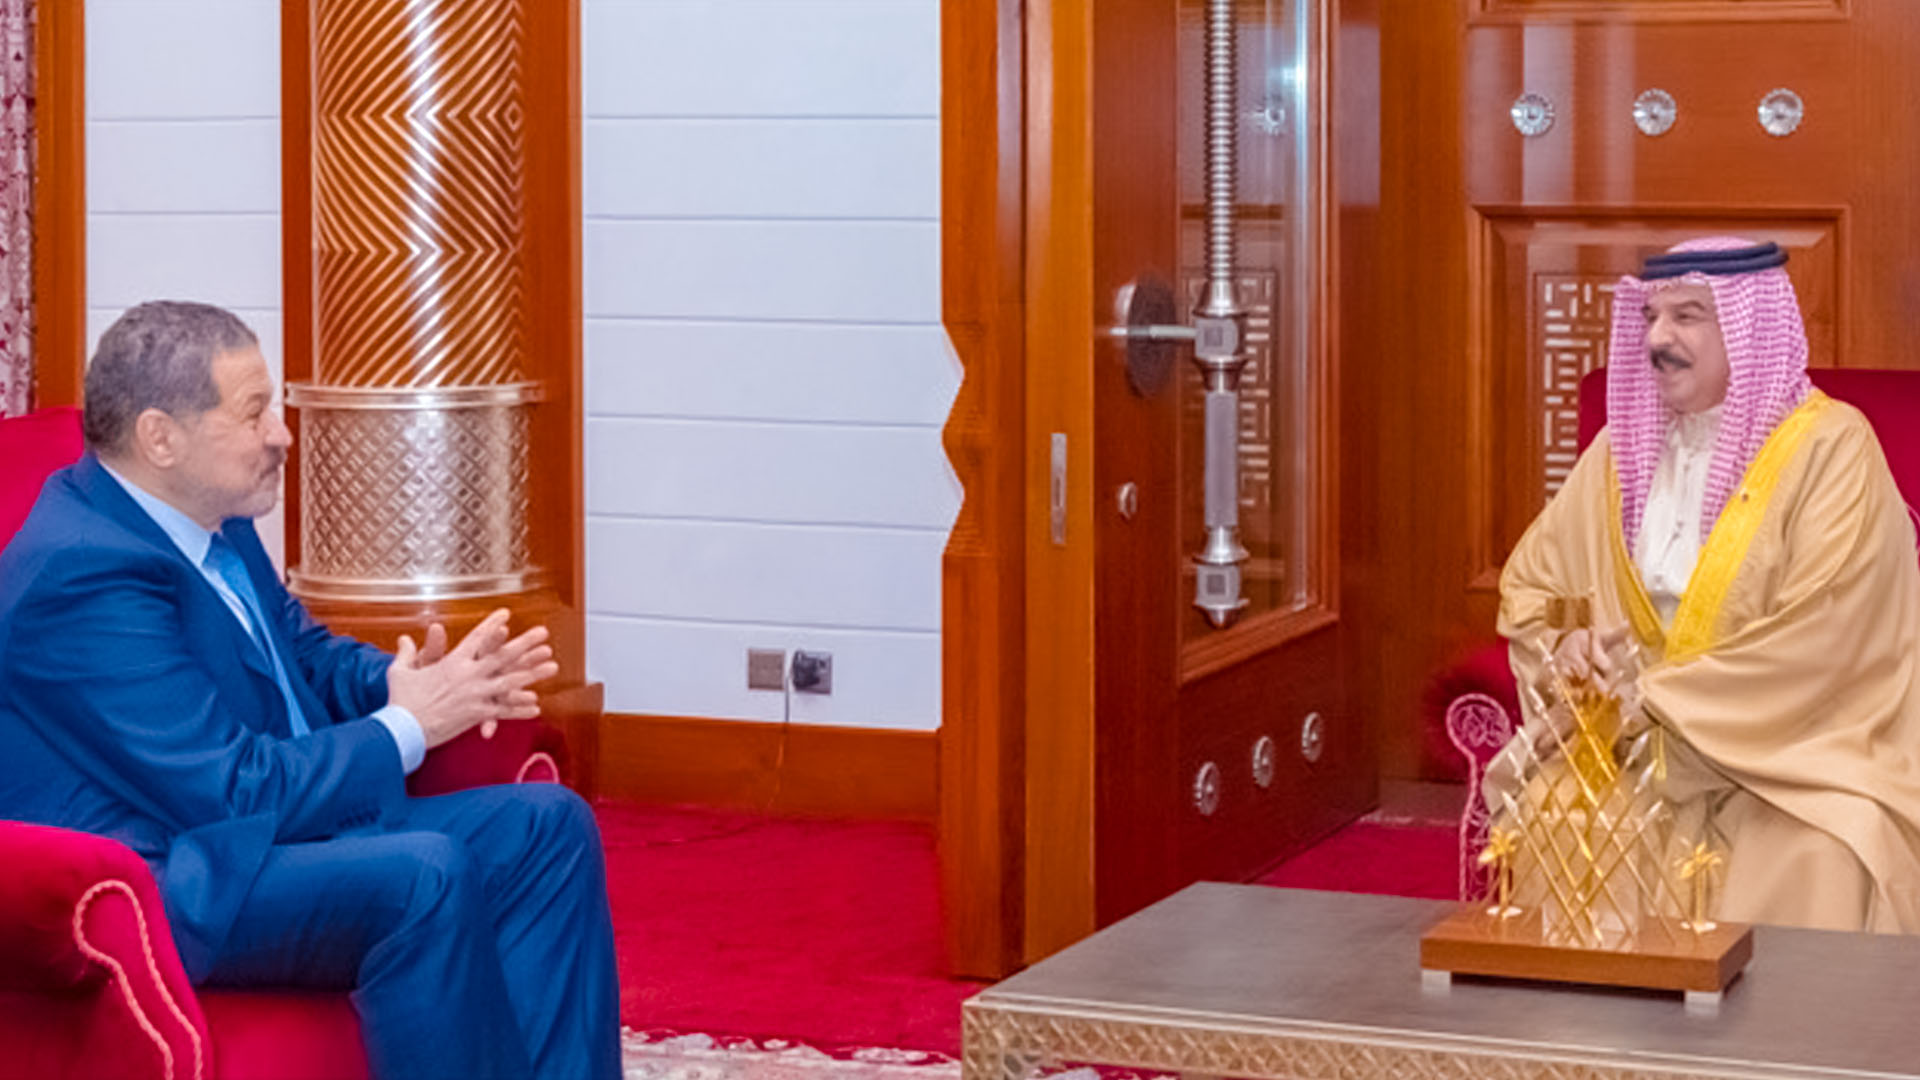 King Hamad receives a Palestinian senior official